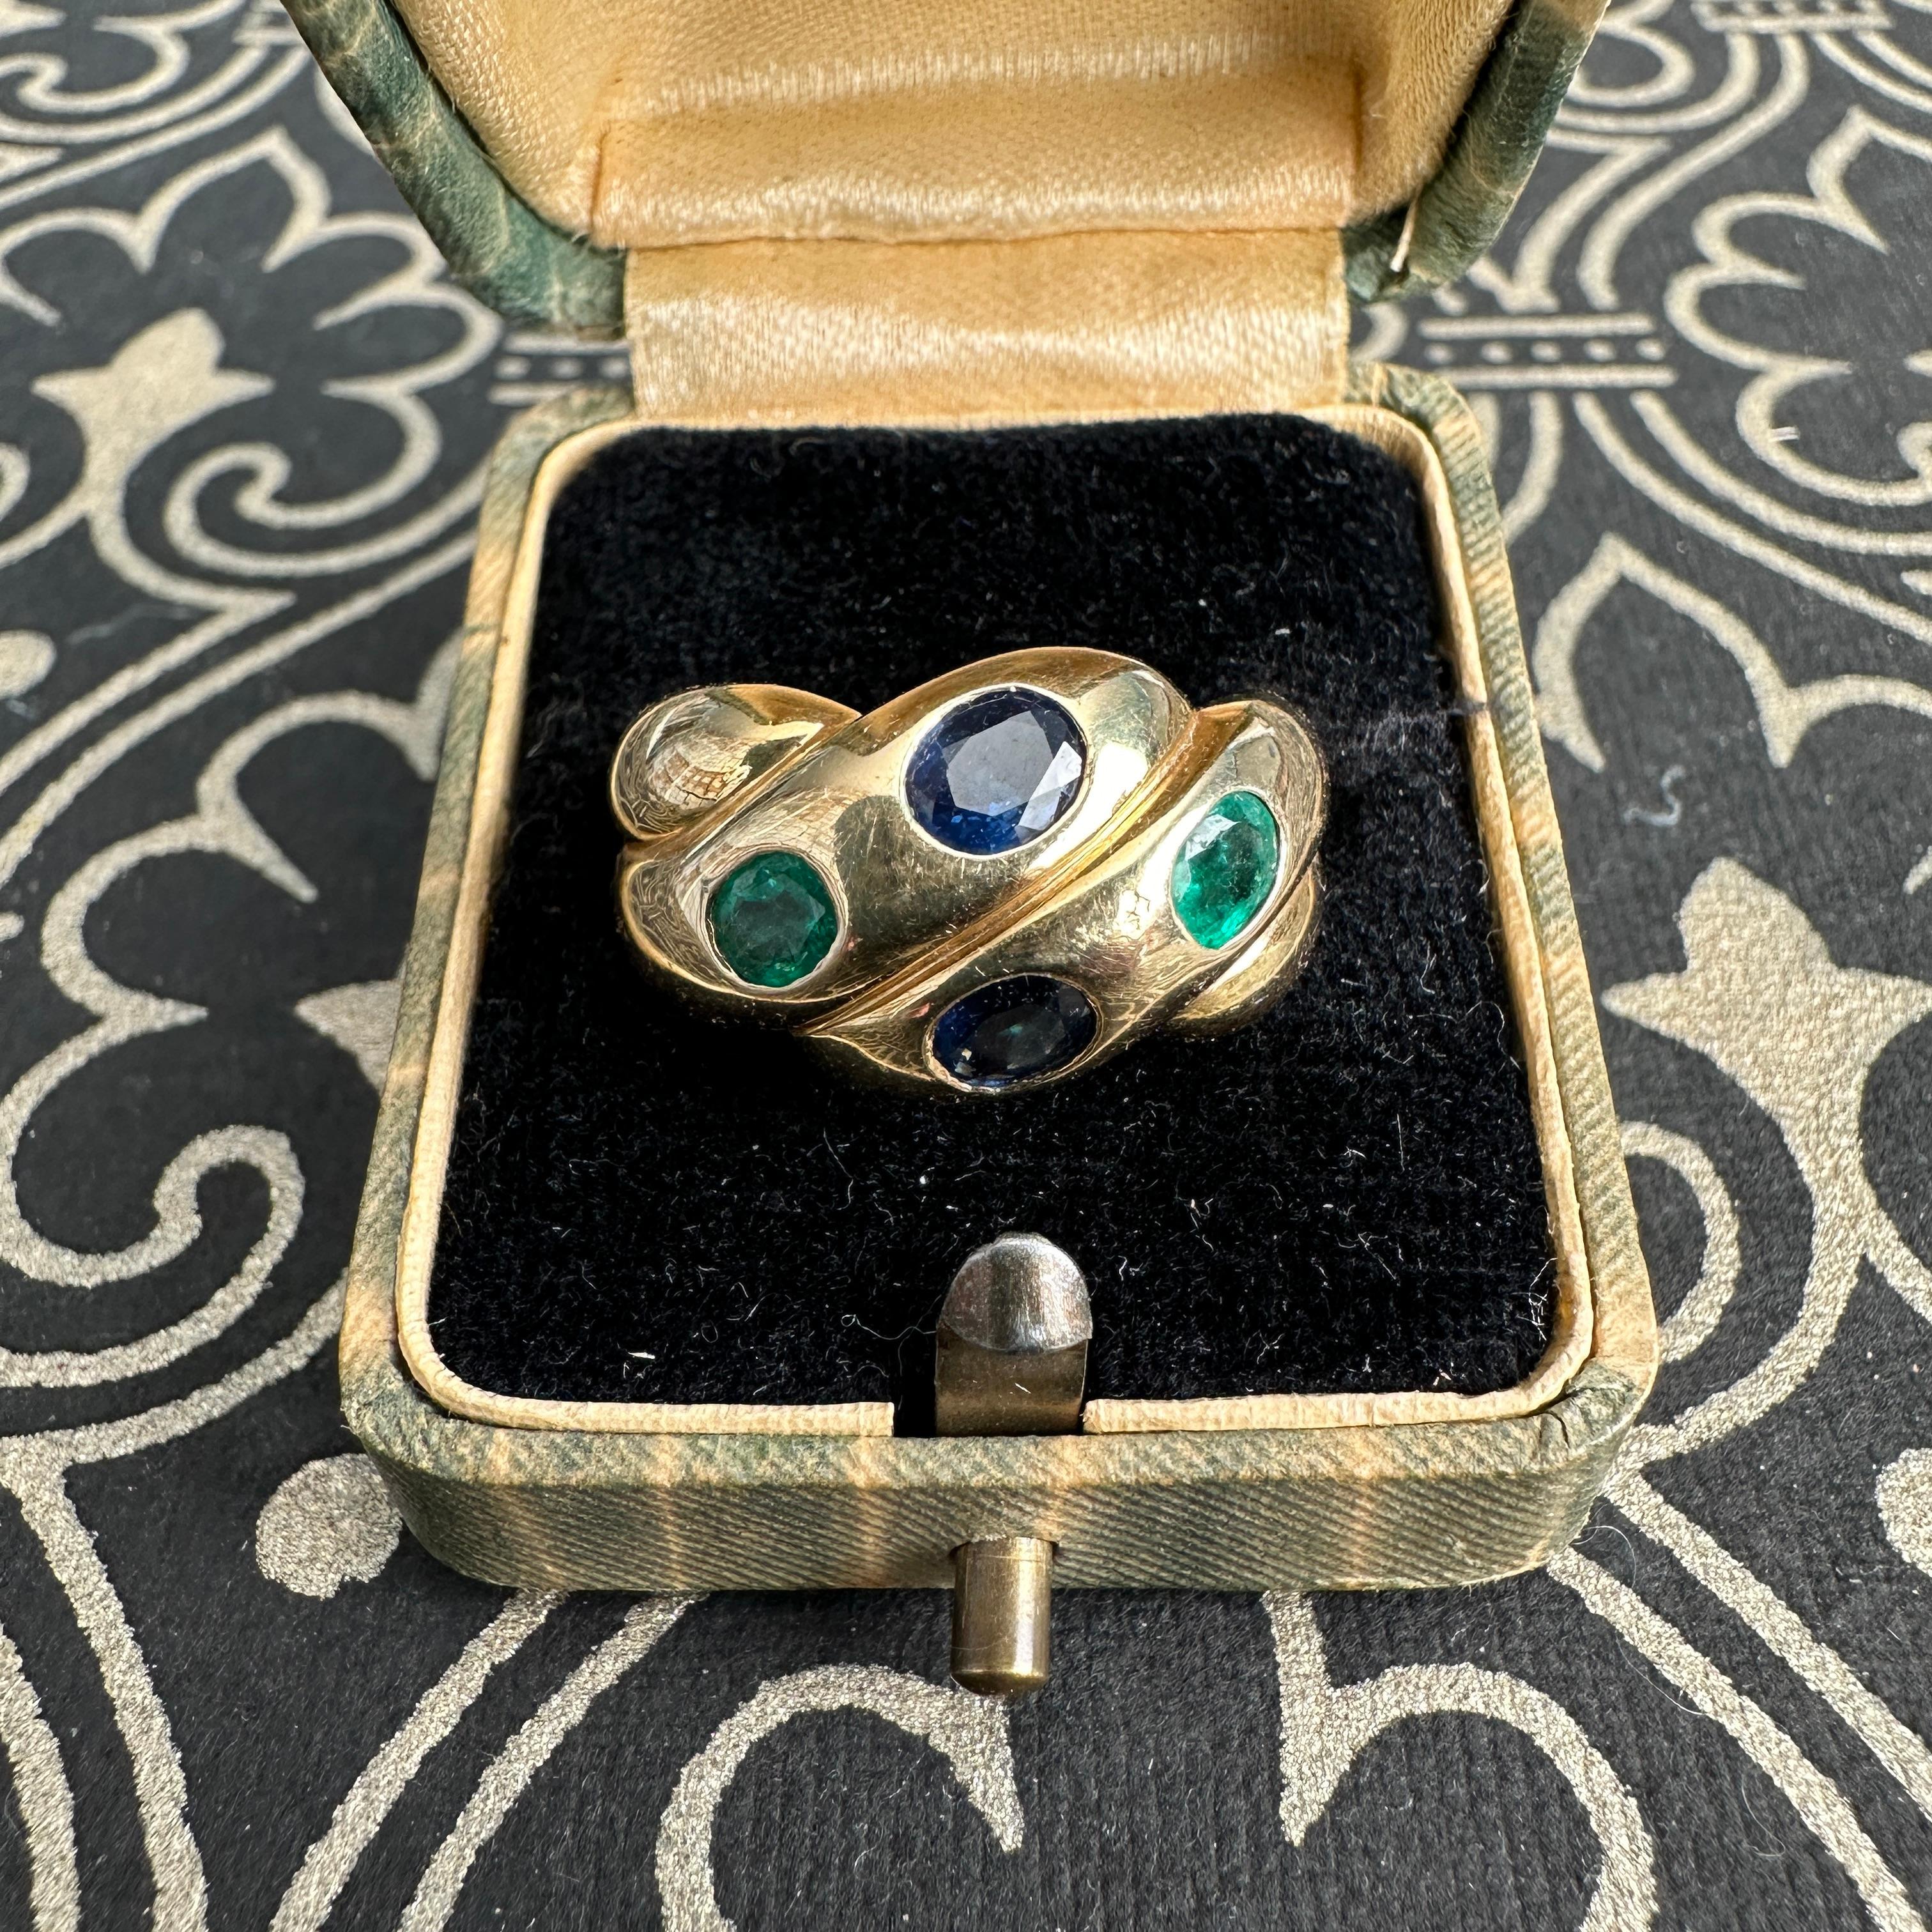 Details:
Fabulous French vintage snake ring with Emeralds and Sapphires. Two snakes intertwining was a common theme in the Victorian era, made popular when Prince Albert gave Victoria a coiled serpent engagement ring in 1839. The symbolism of the